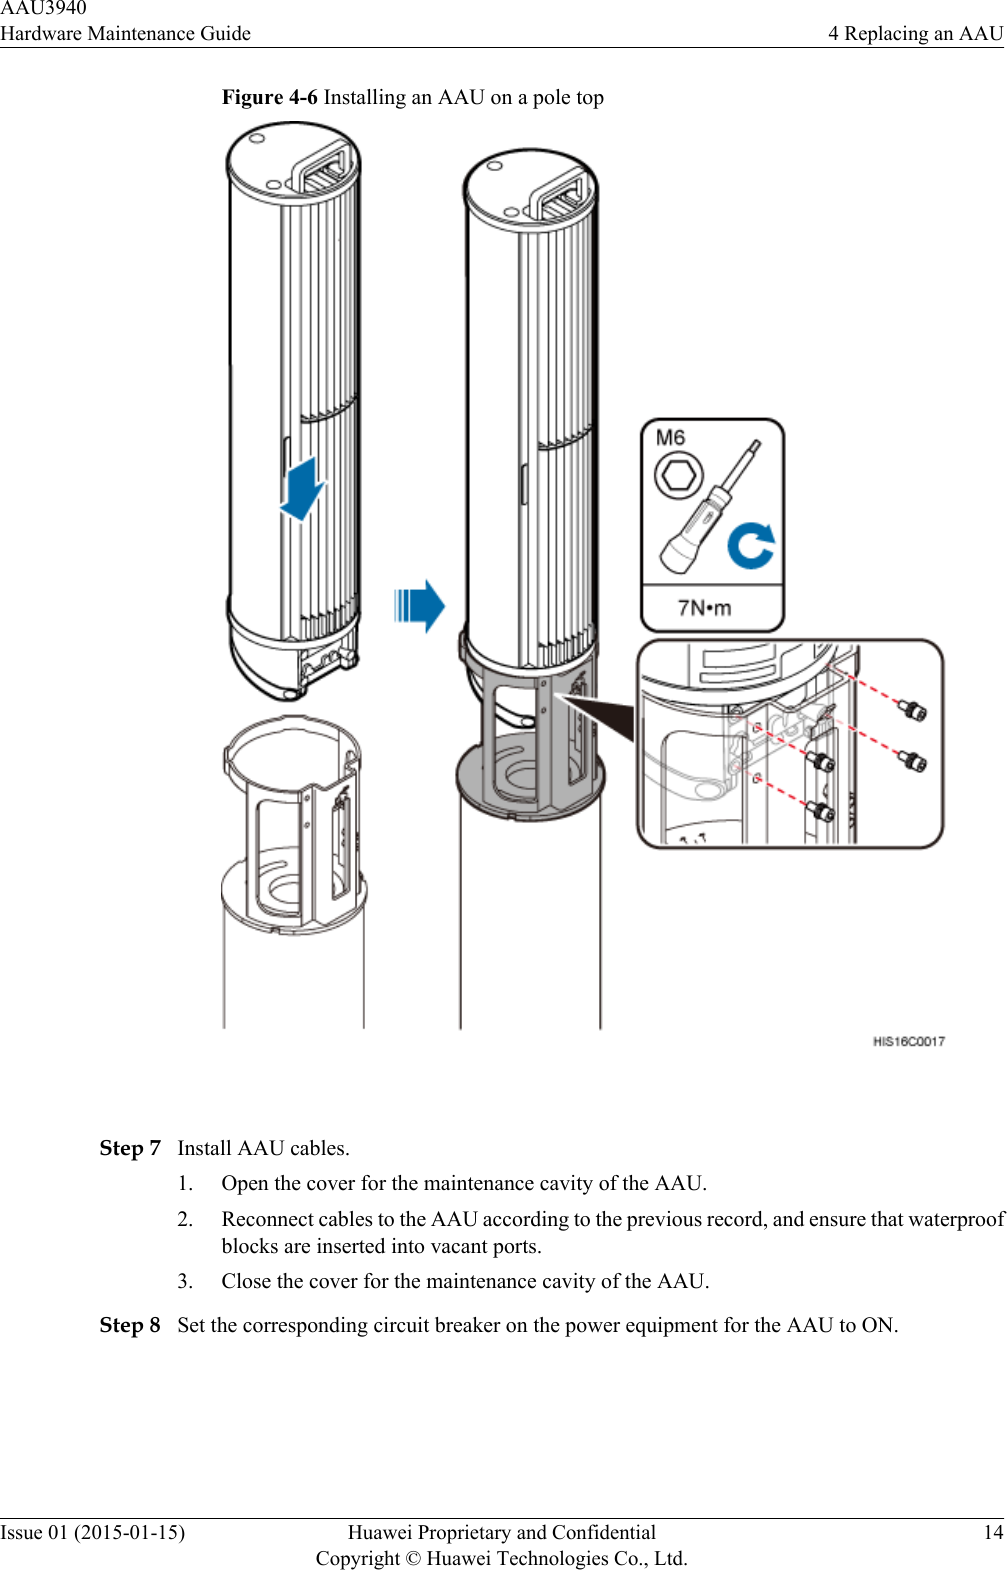 Figure 4-6 Installing an AAU on a pole top Step 7 Install AAU cables.1. Open the cover for the maintenance cavity of the AAU.2. Reconnect cables to the AAU according to the previous record, and ensure that waterproofblocks are inserted into vacant ports.3. Close the cover for the maintenance cavity of the AAU.Step 8 Set the corresponding circuit breaker on the power equipment for the AAU to ON.AAU3940Hardware Maintenance Guide 4 Replacing an AAUIssue 01 (2015-01-15) Huawei Proprietary and ConfidentialCopyright © Huawei Technologies Co., Ltd.14